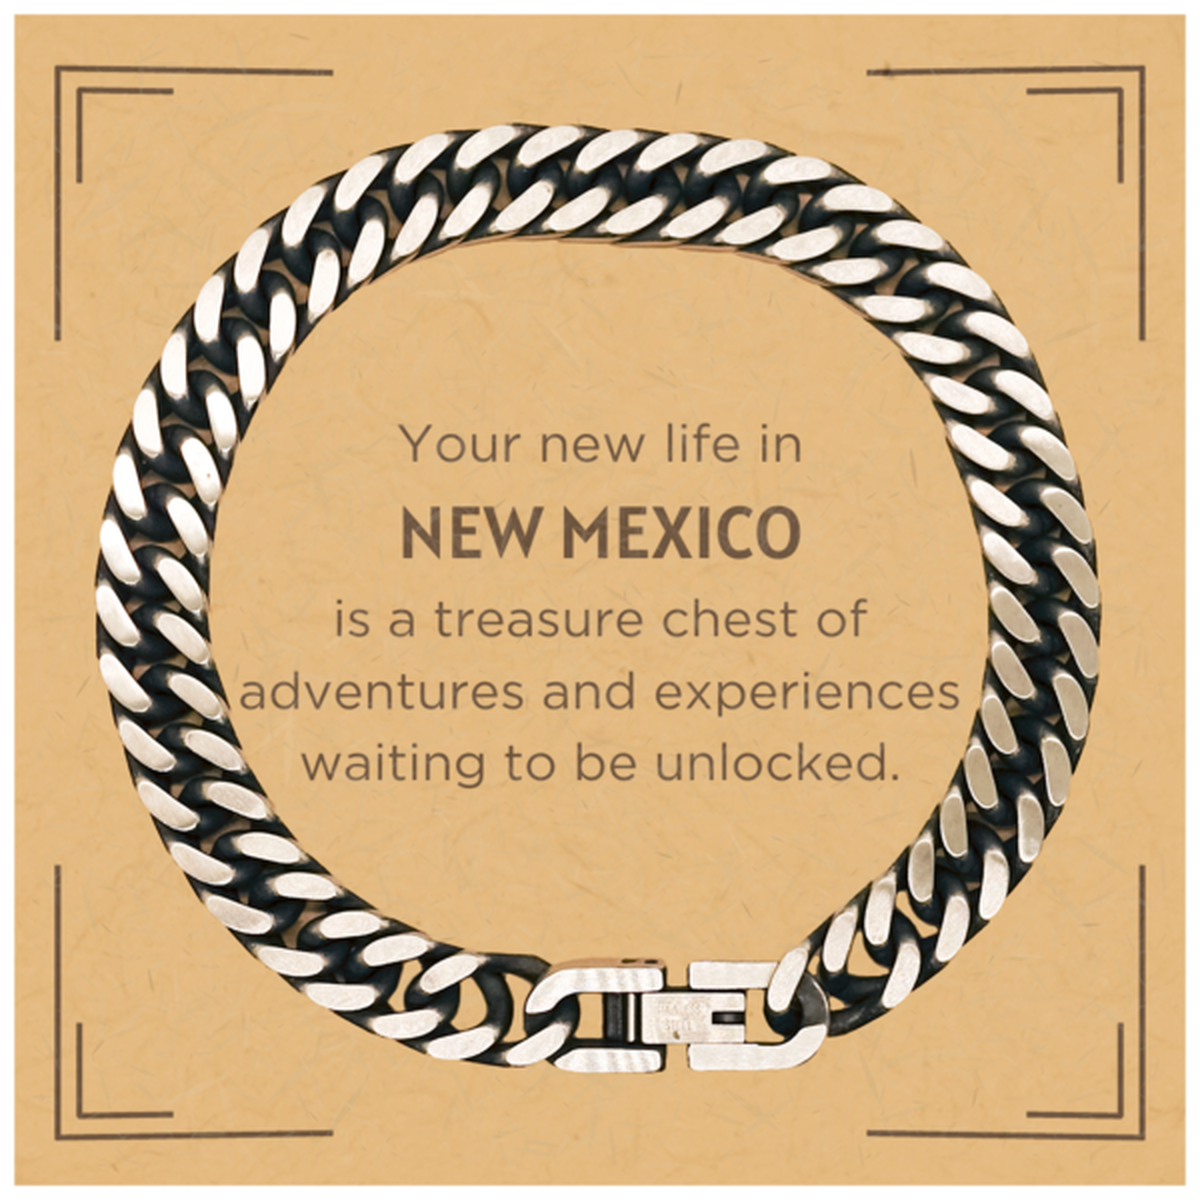 Moving to New Mexico Gifts, Your new life in New Mexico, Long Distance New Mexico Christmas Cuban Link Chain Bracelet For Men, Women, Friends, Coworkers